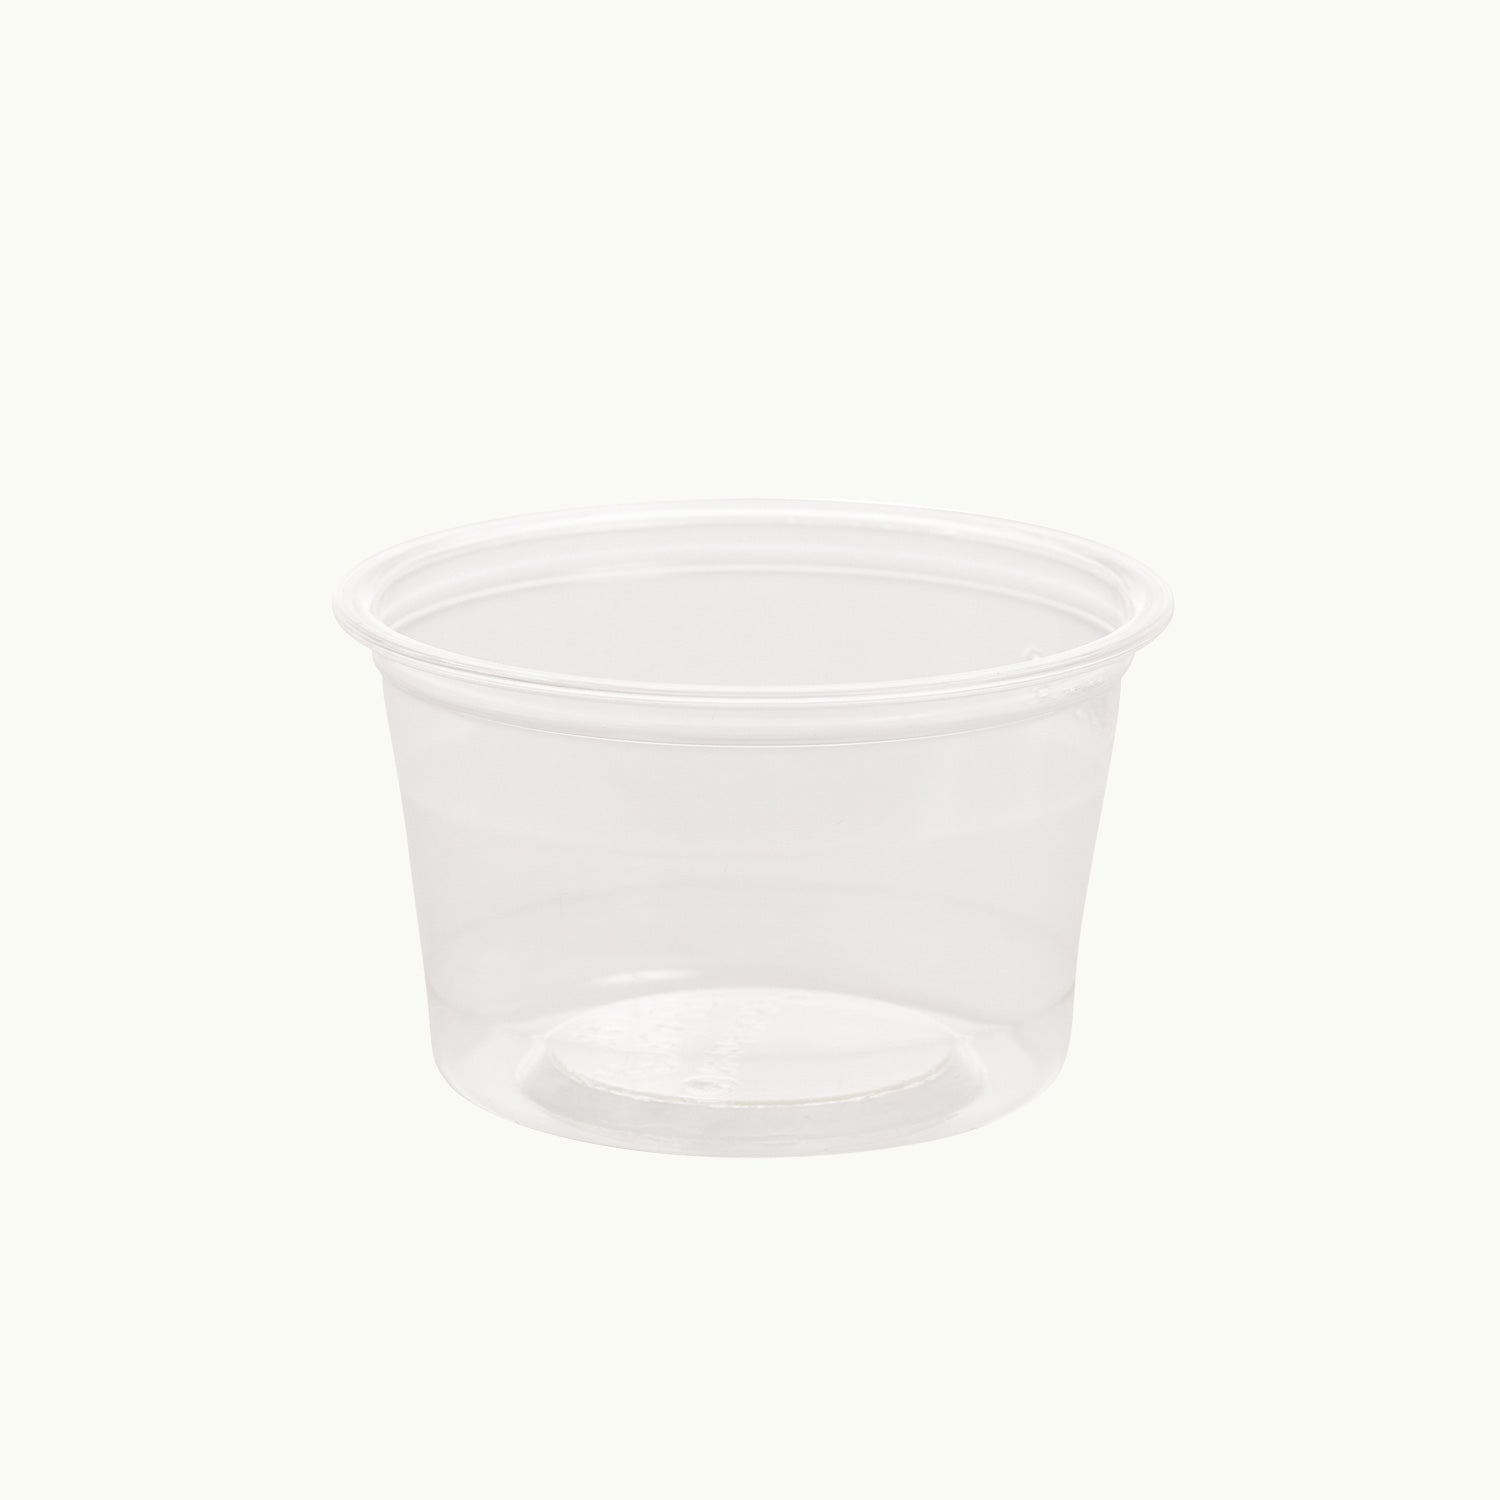 140ml clear sauce container